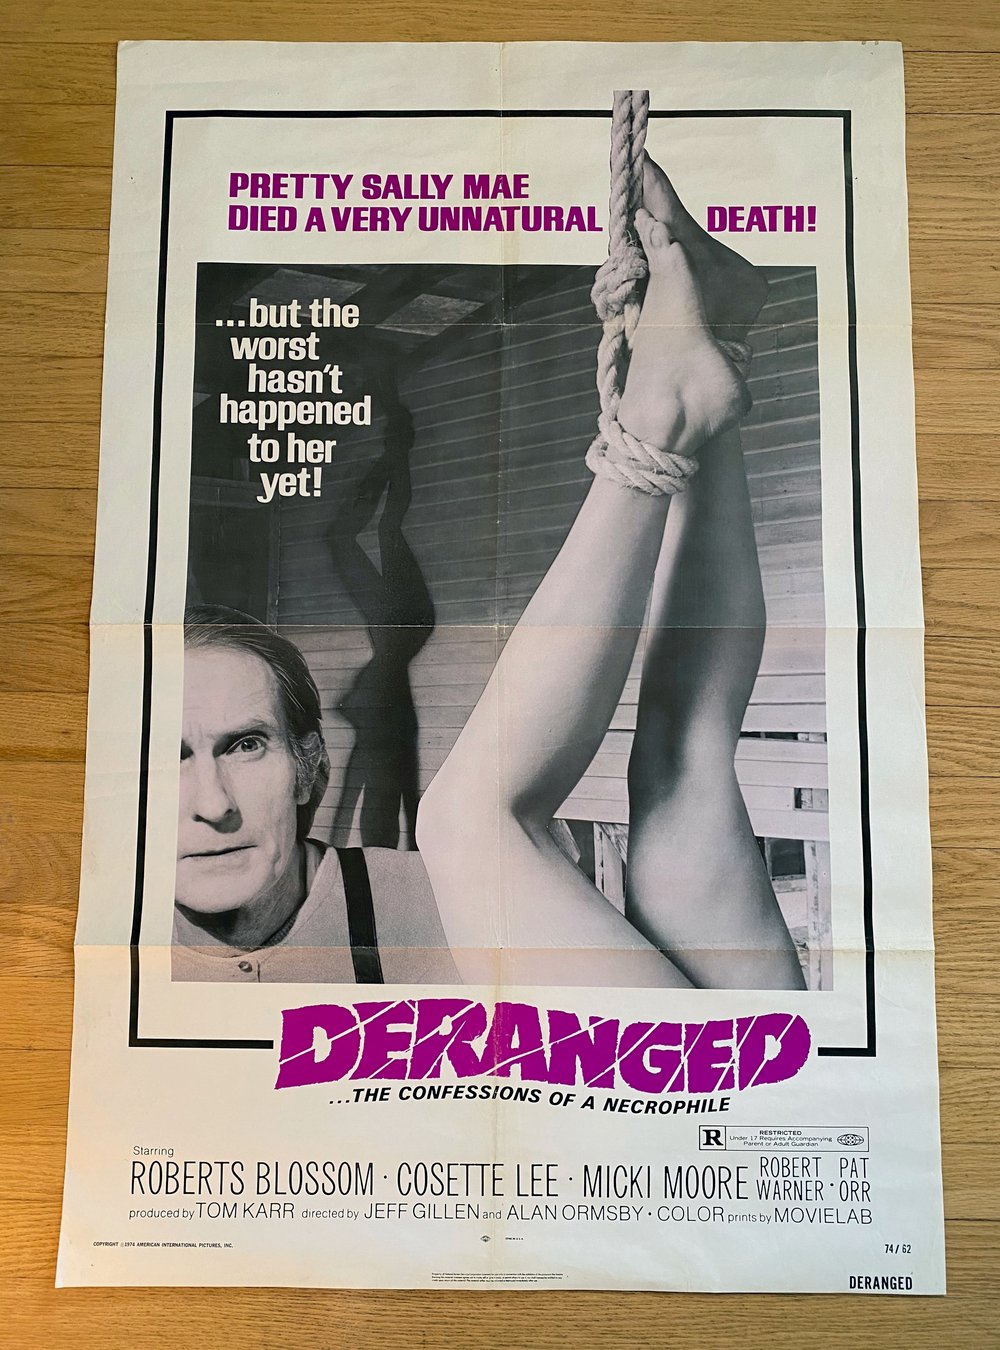 1974 DERANGED...THE CONFESSIONS OF A NECROPHILE Original U.S. One Sheet Movie Poster